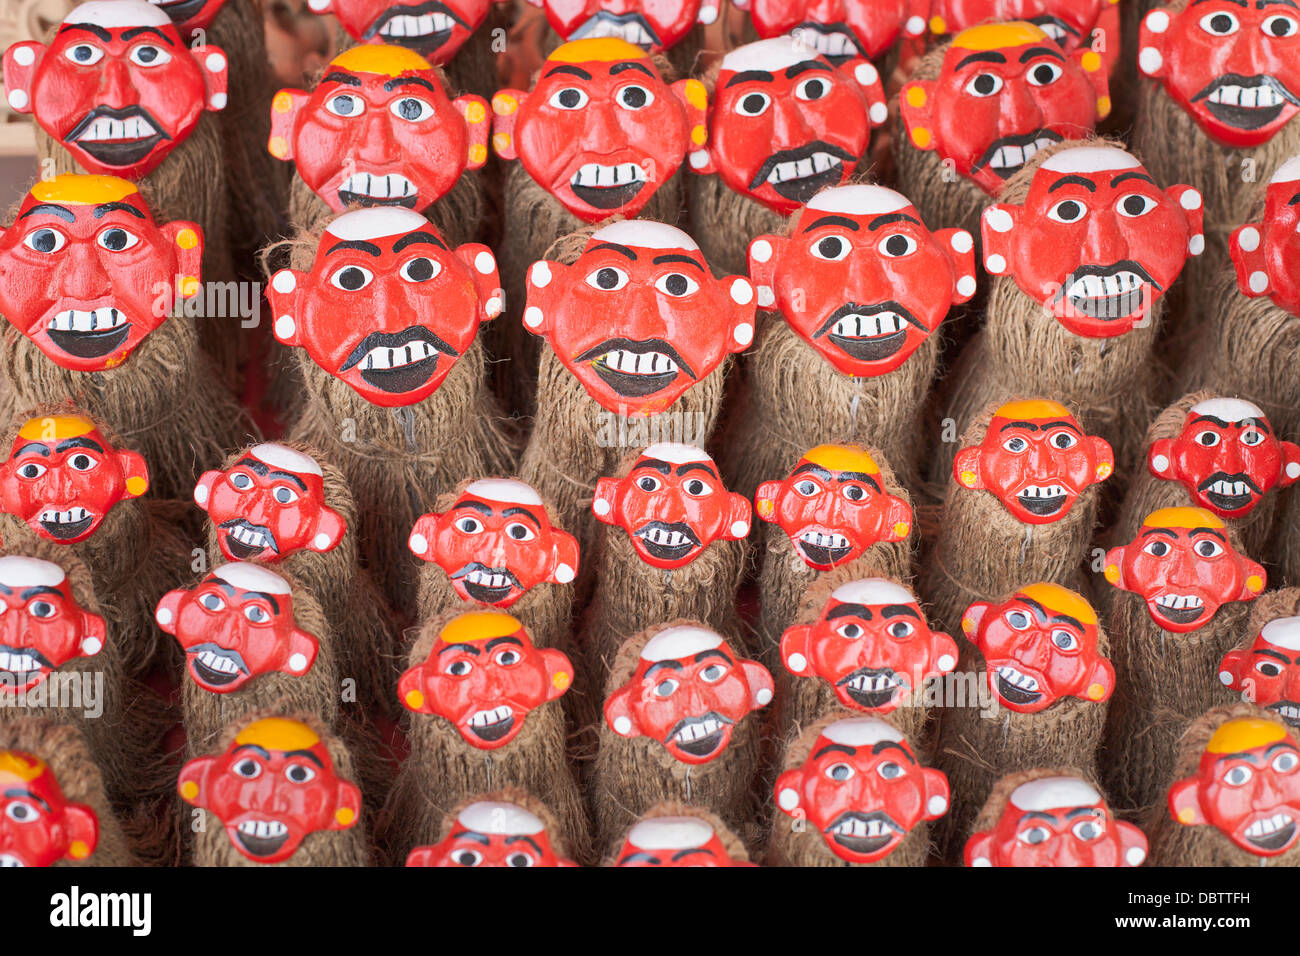 Puppets for sale at a market stall in Luang Prabang, Laos Stock Photo